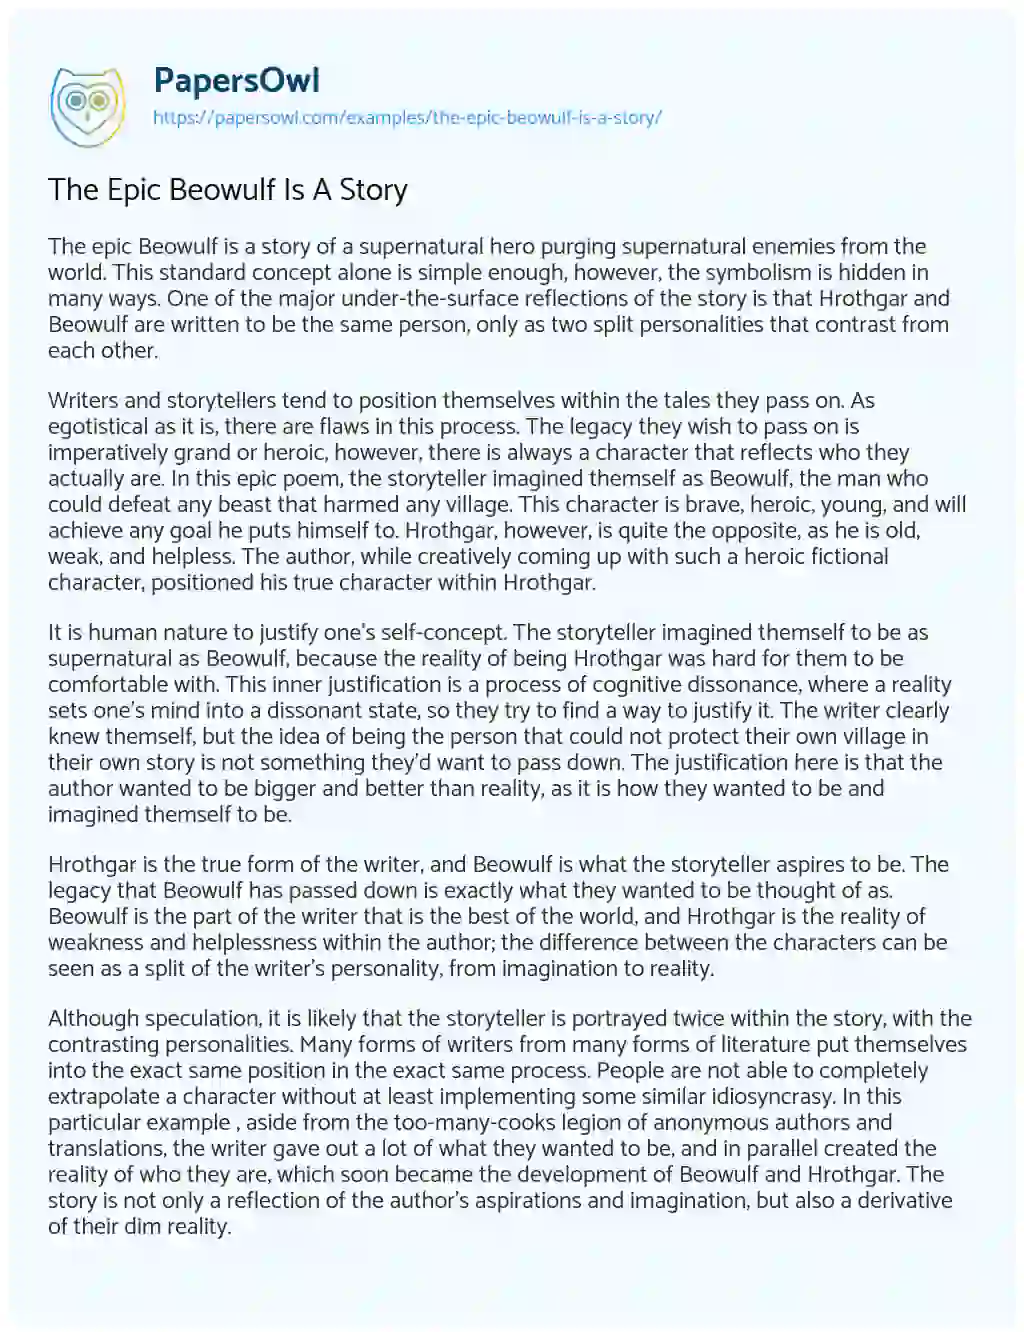 Essay on The Epic Beowulf is a Story